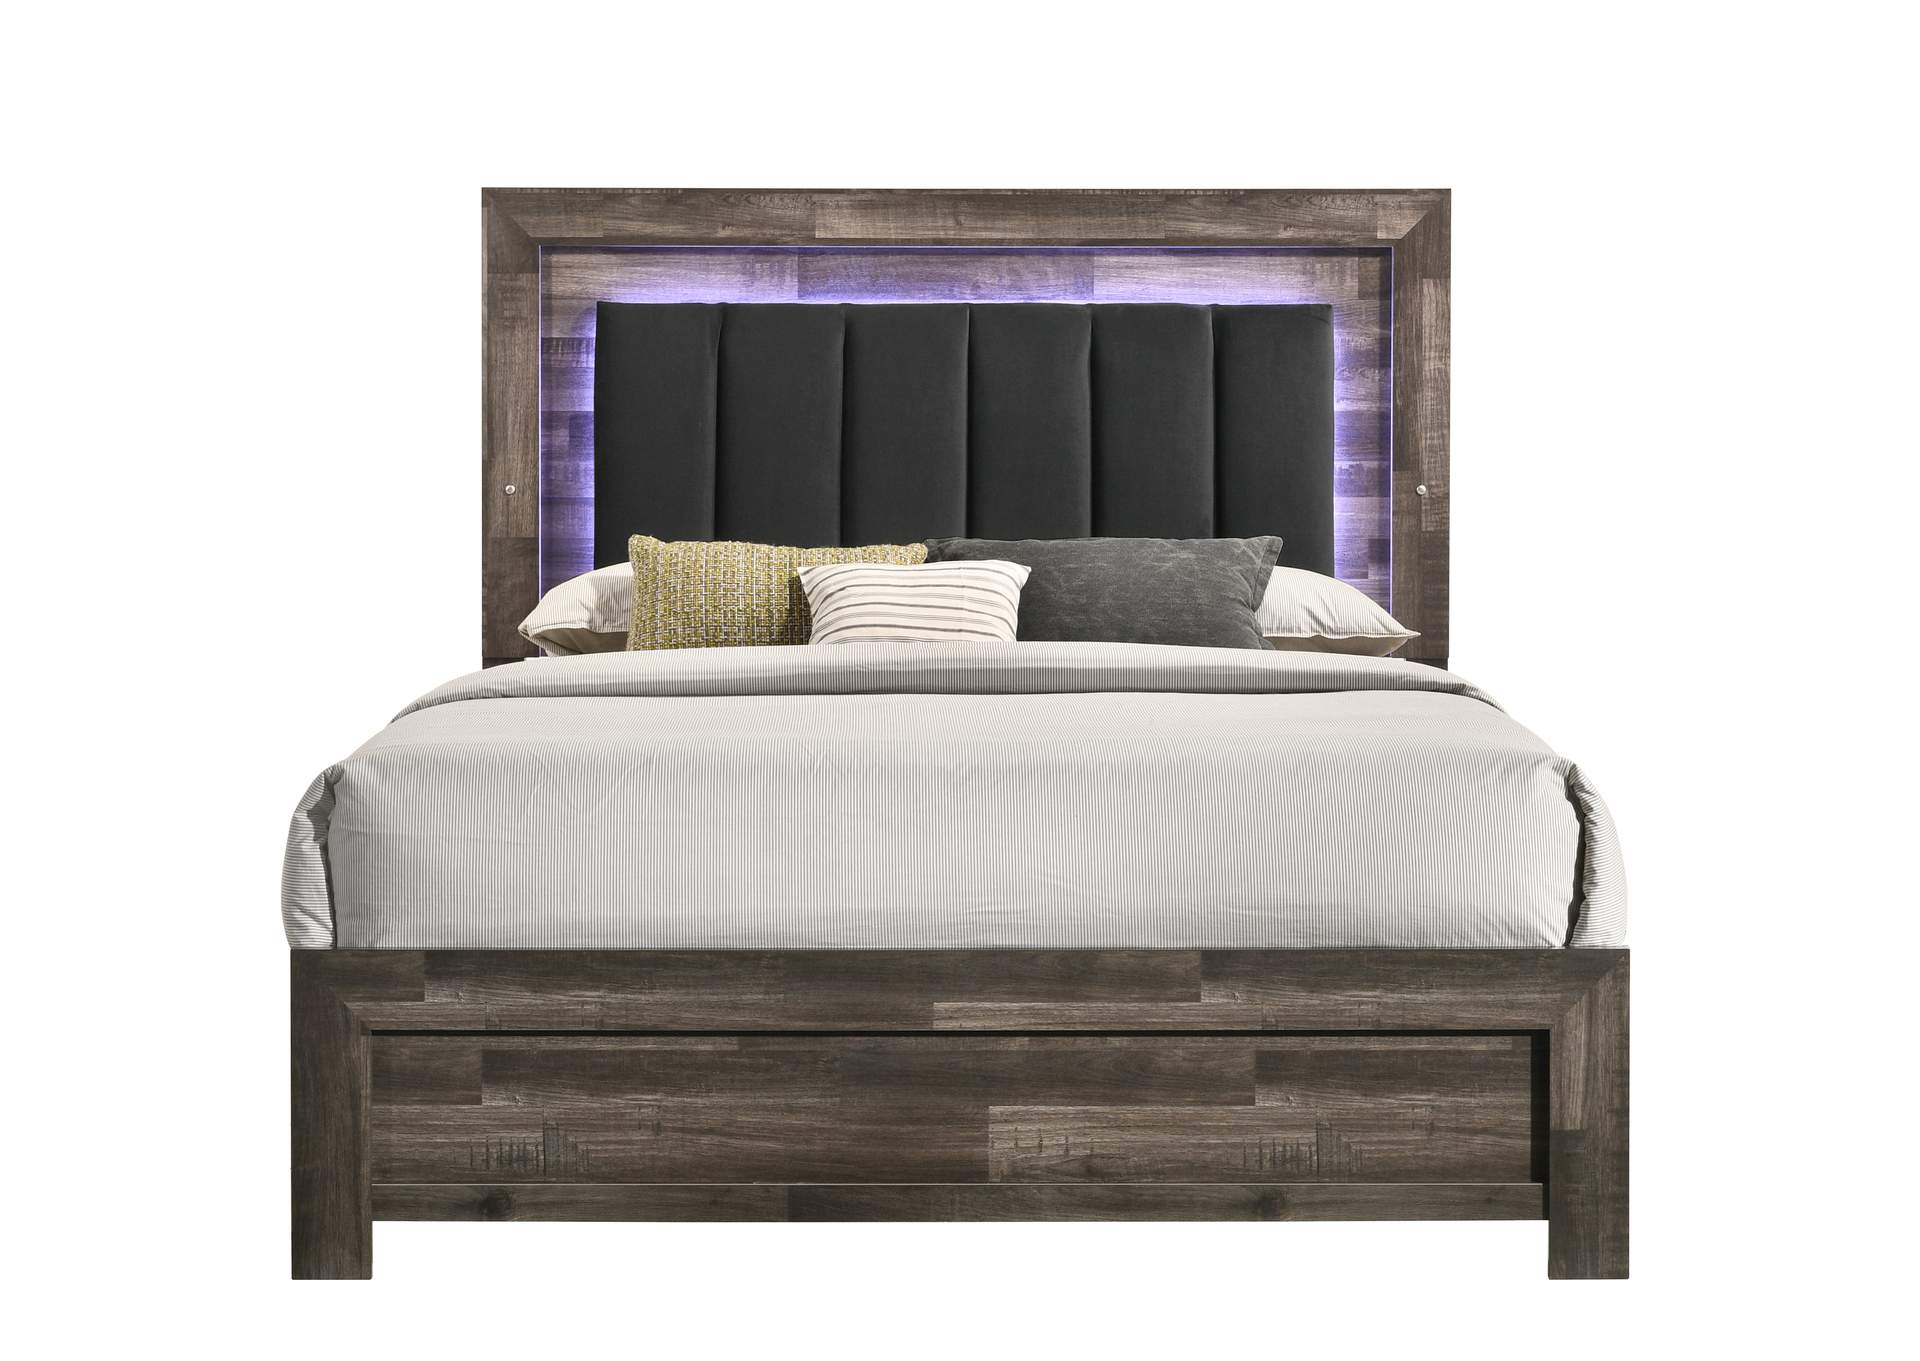 Johnny Brown Full Bed w/ LED,Titanic Furniture